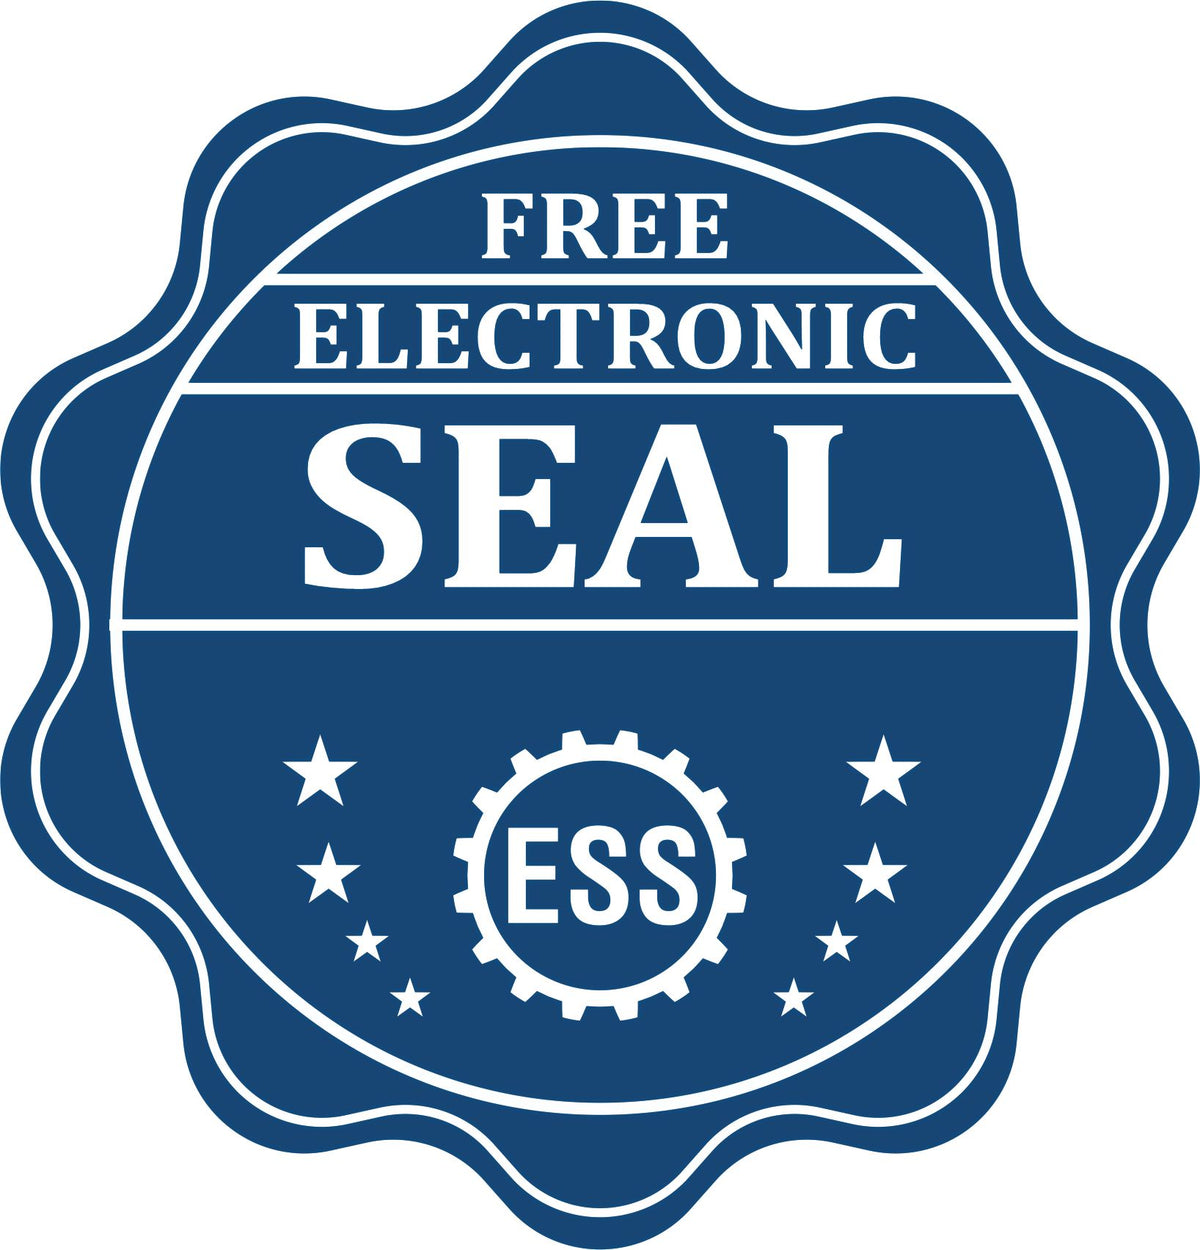 A badge showing a free electronic seal for the Louisiana Desk Surveyor Seal Embosser with stars and the ESS gear on the emblem.